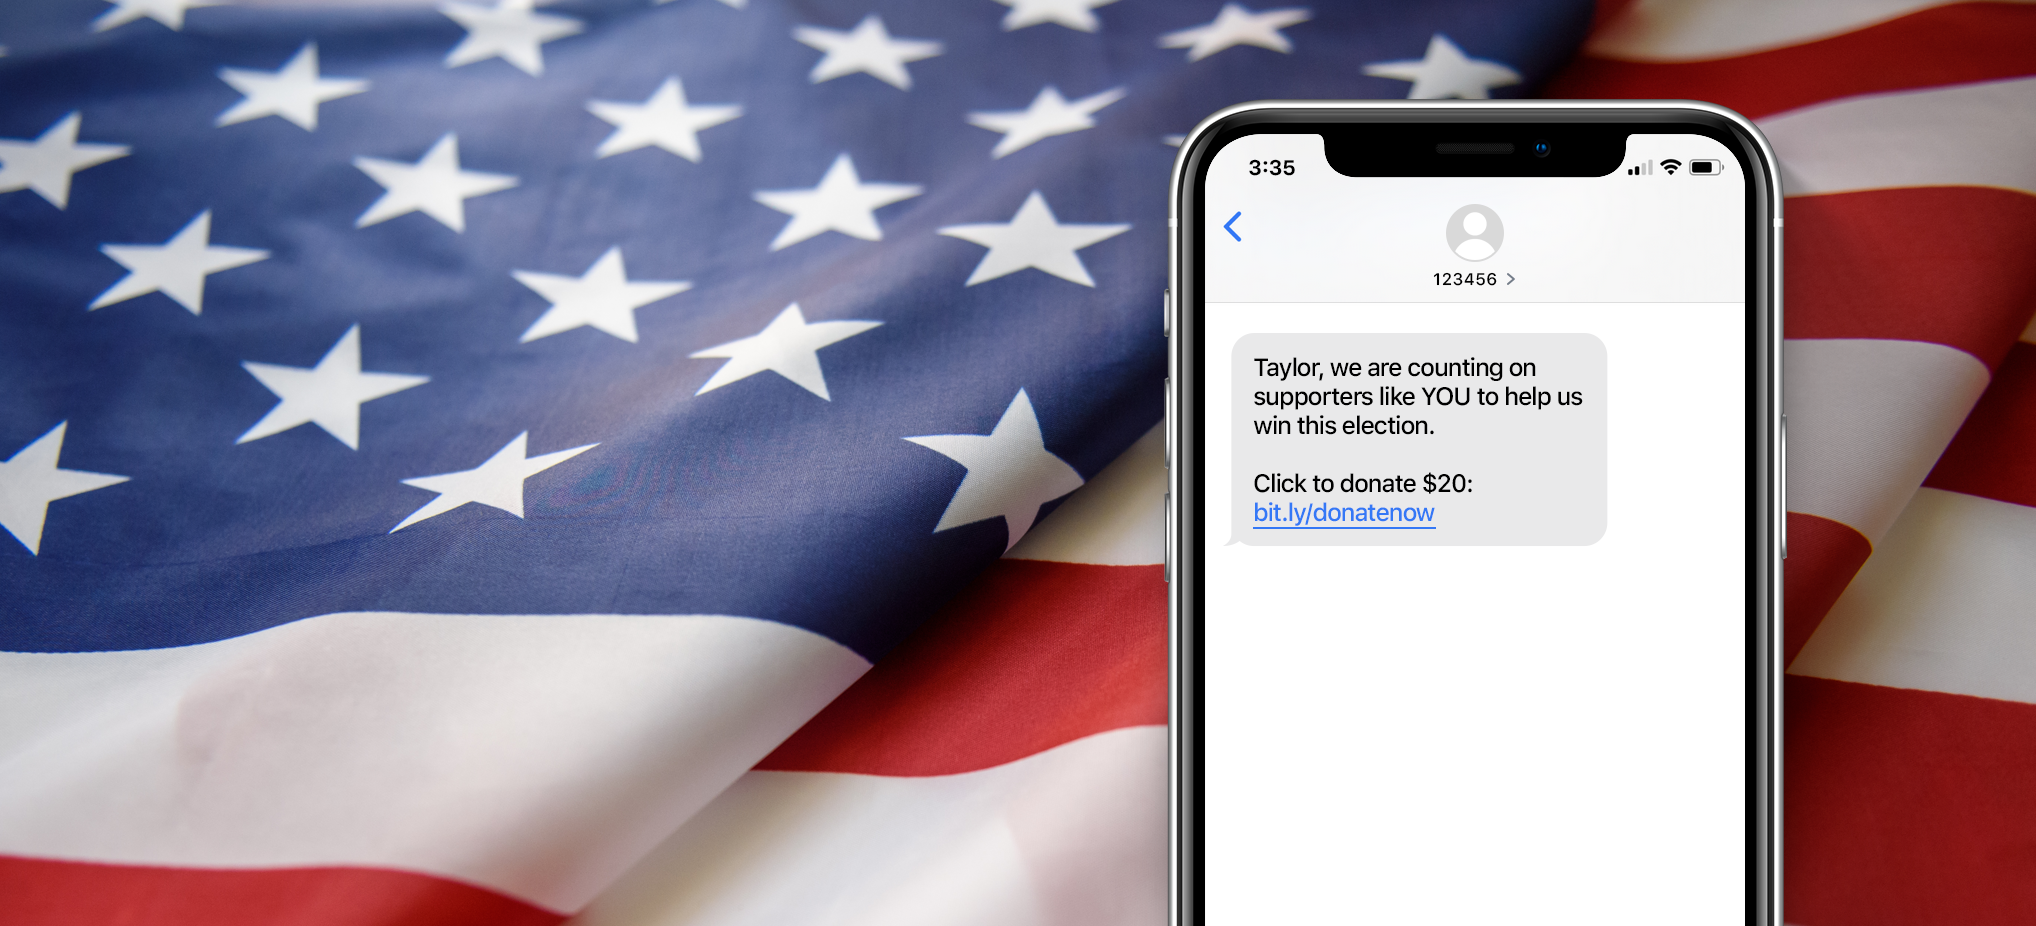 5 Tips to Write Winning Political Text Messages 1